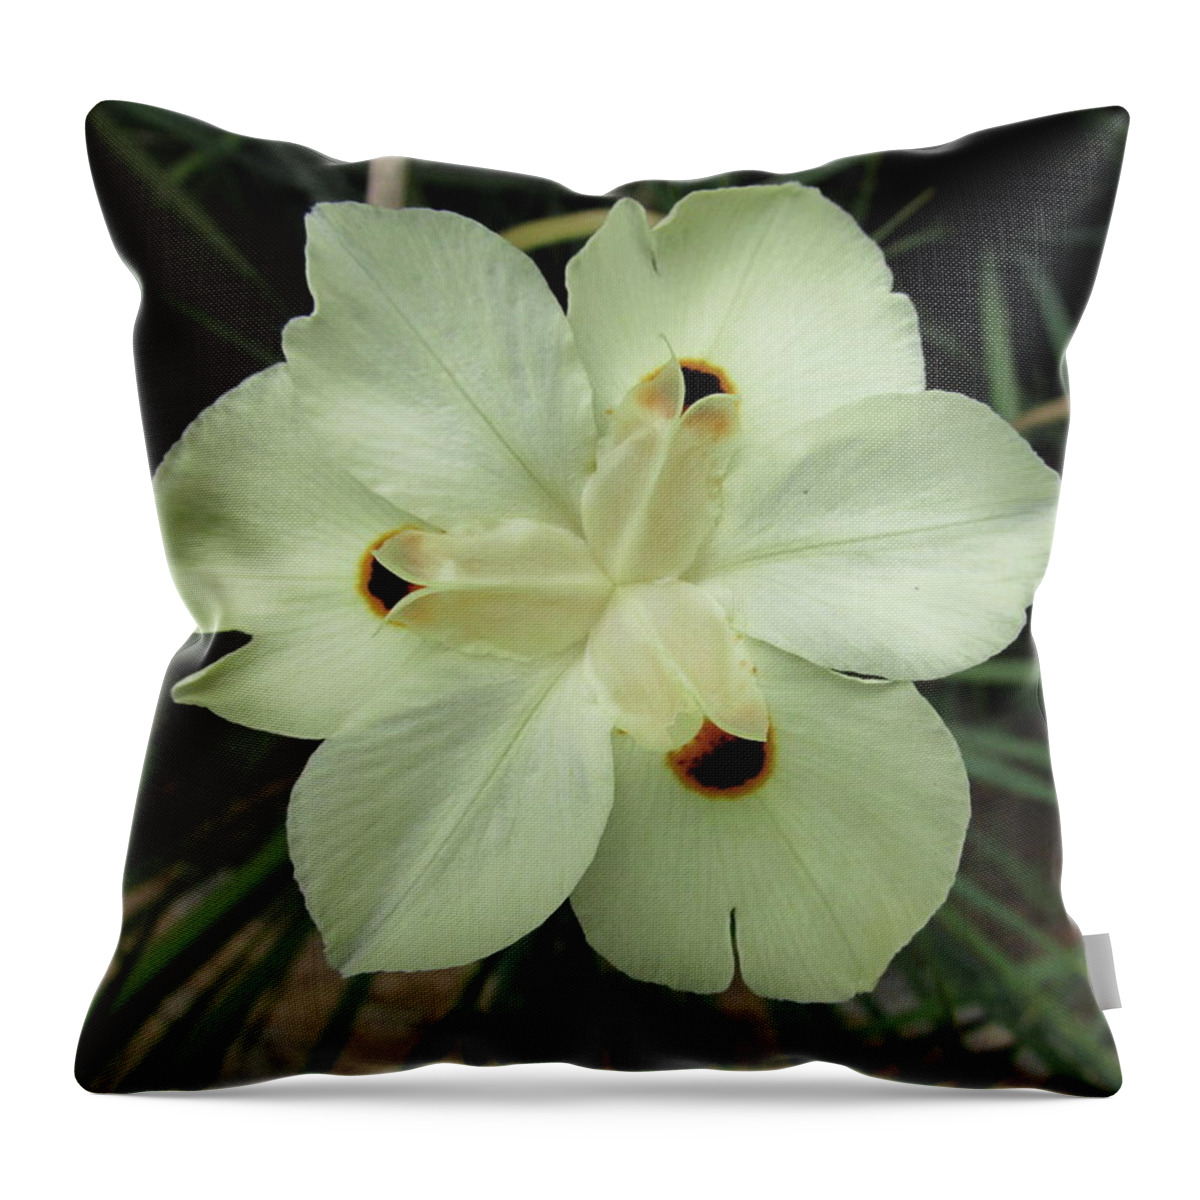 Orchid Throw Pillow featuring the photograph Wild Flower by Cesar Vieira